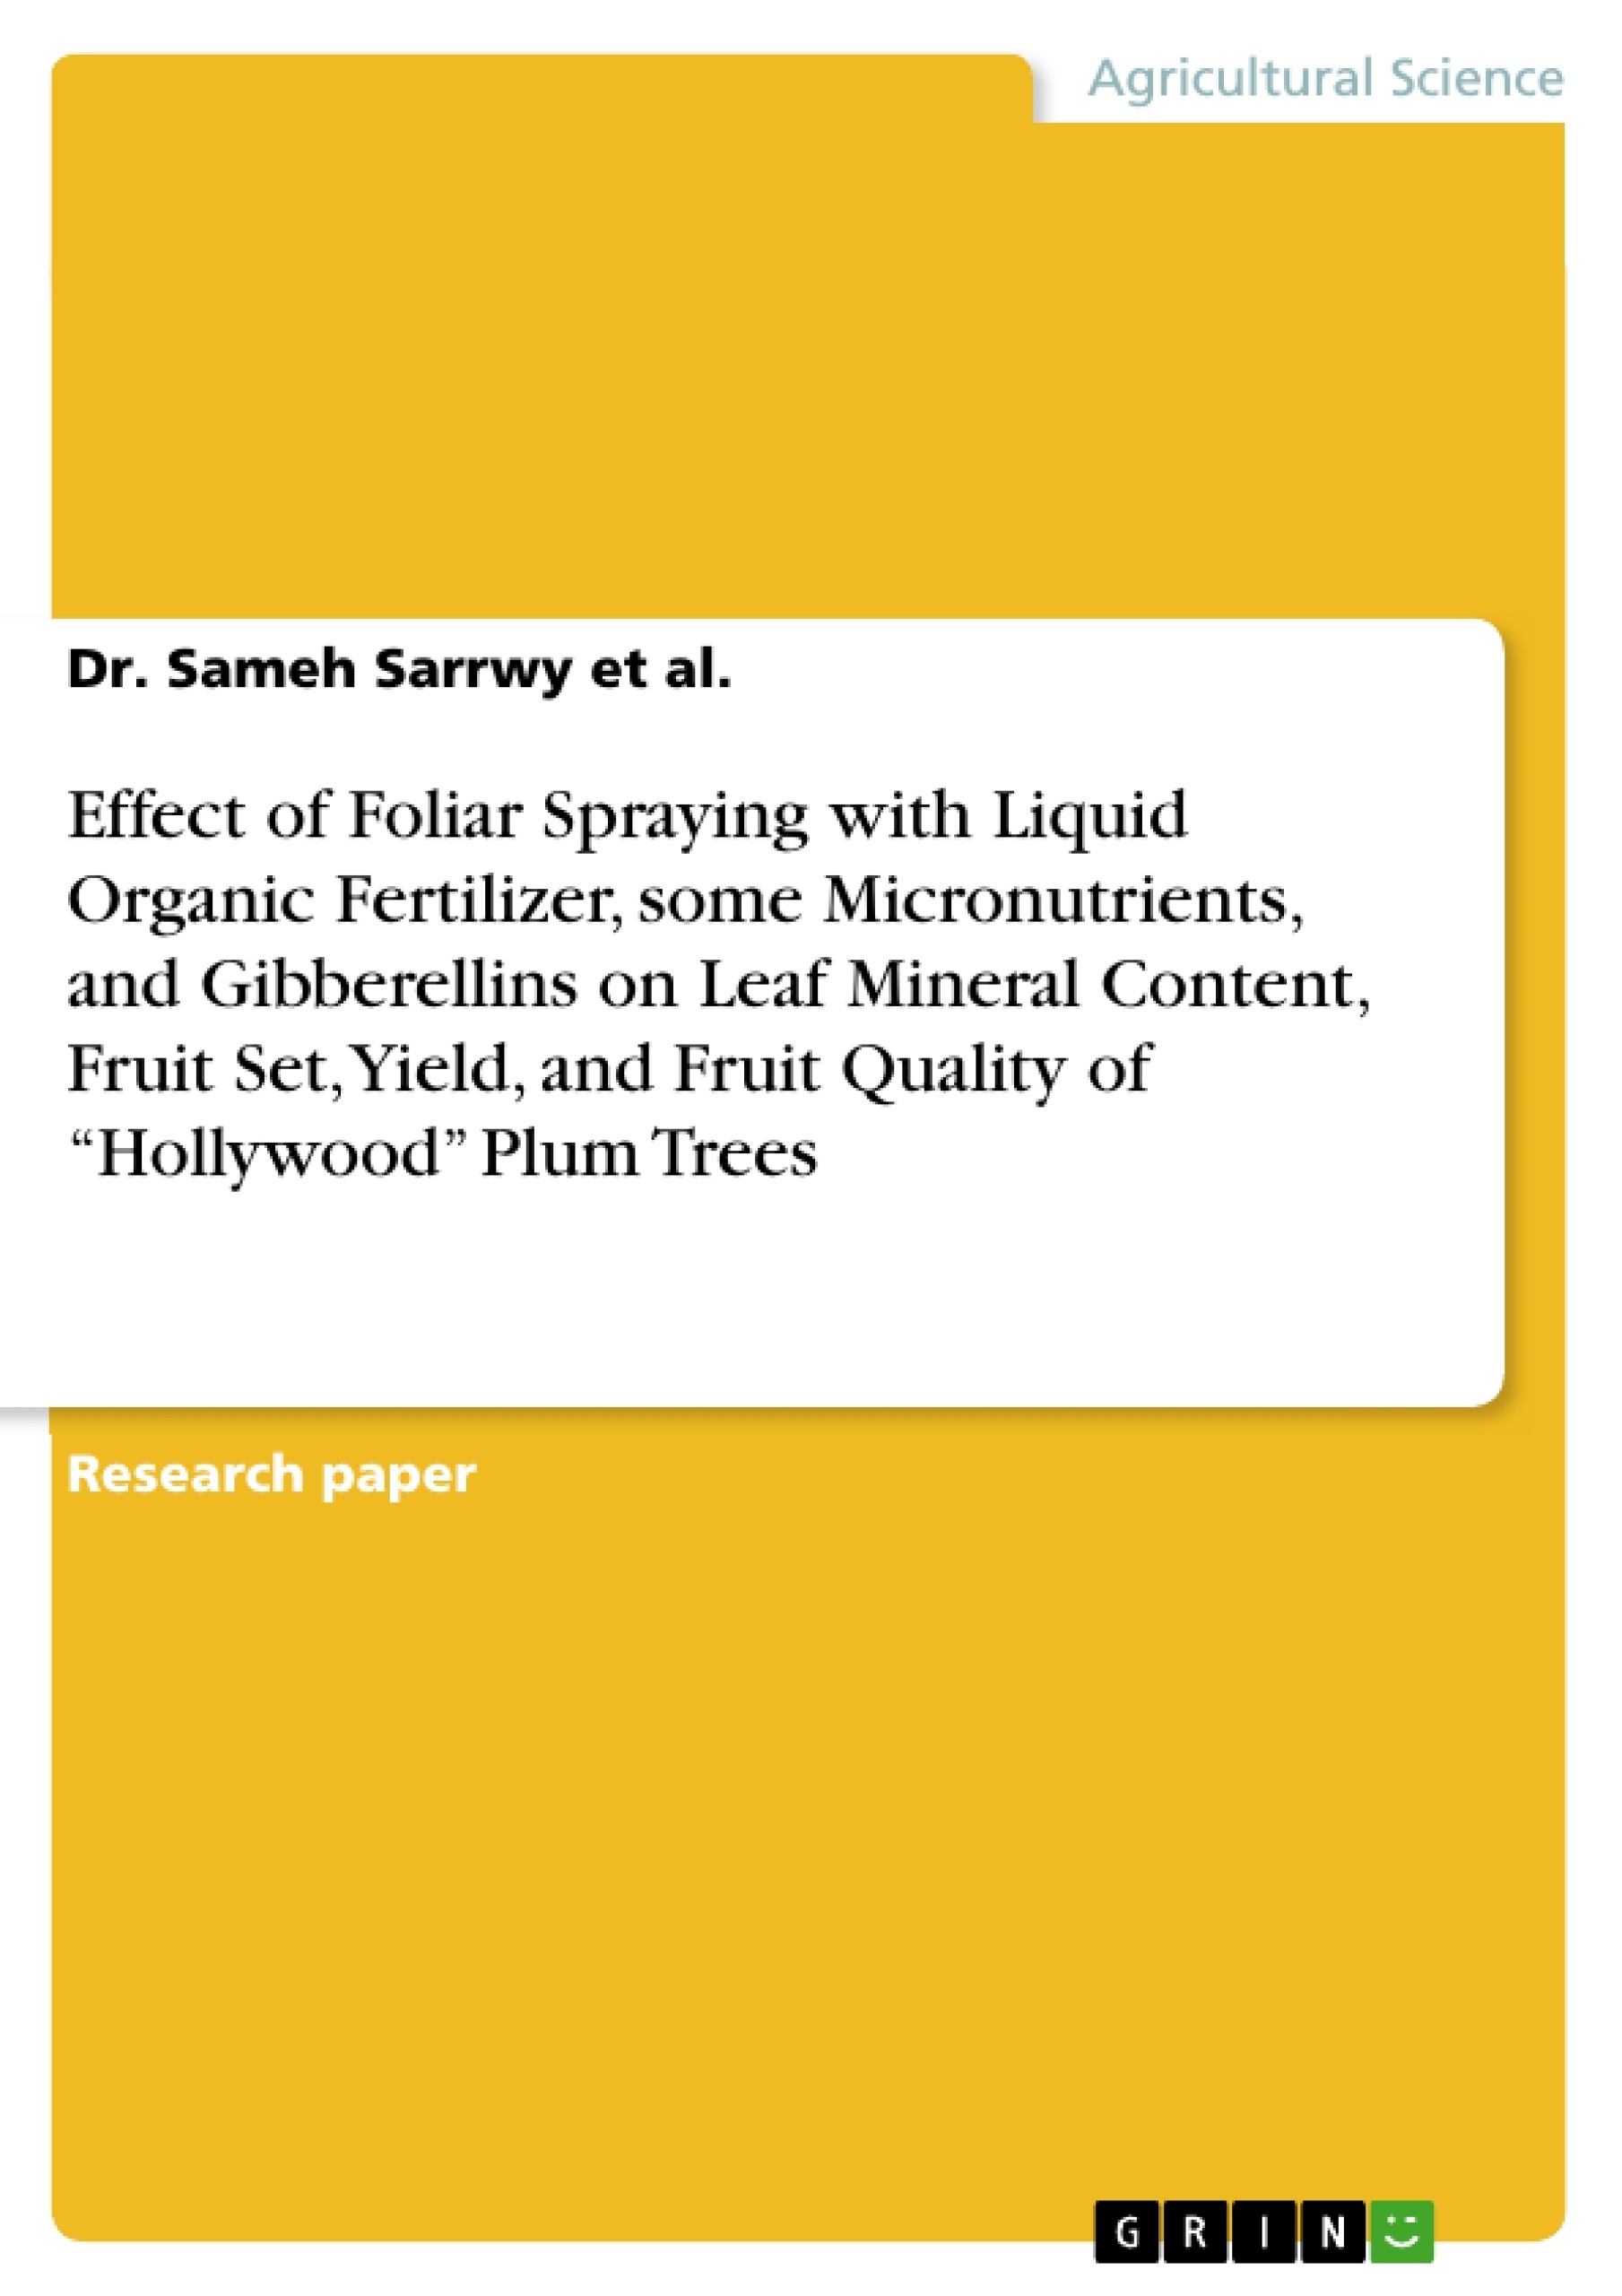 Titre: Effect of Foliar Spraying with Liquid Organic Fertilizer, some Micronutrients, and Gibberellins on Leaf Mineral Content, Fruit Set, Yield, and Fruit Quality of “Hollywood” Plum Trees